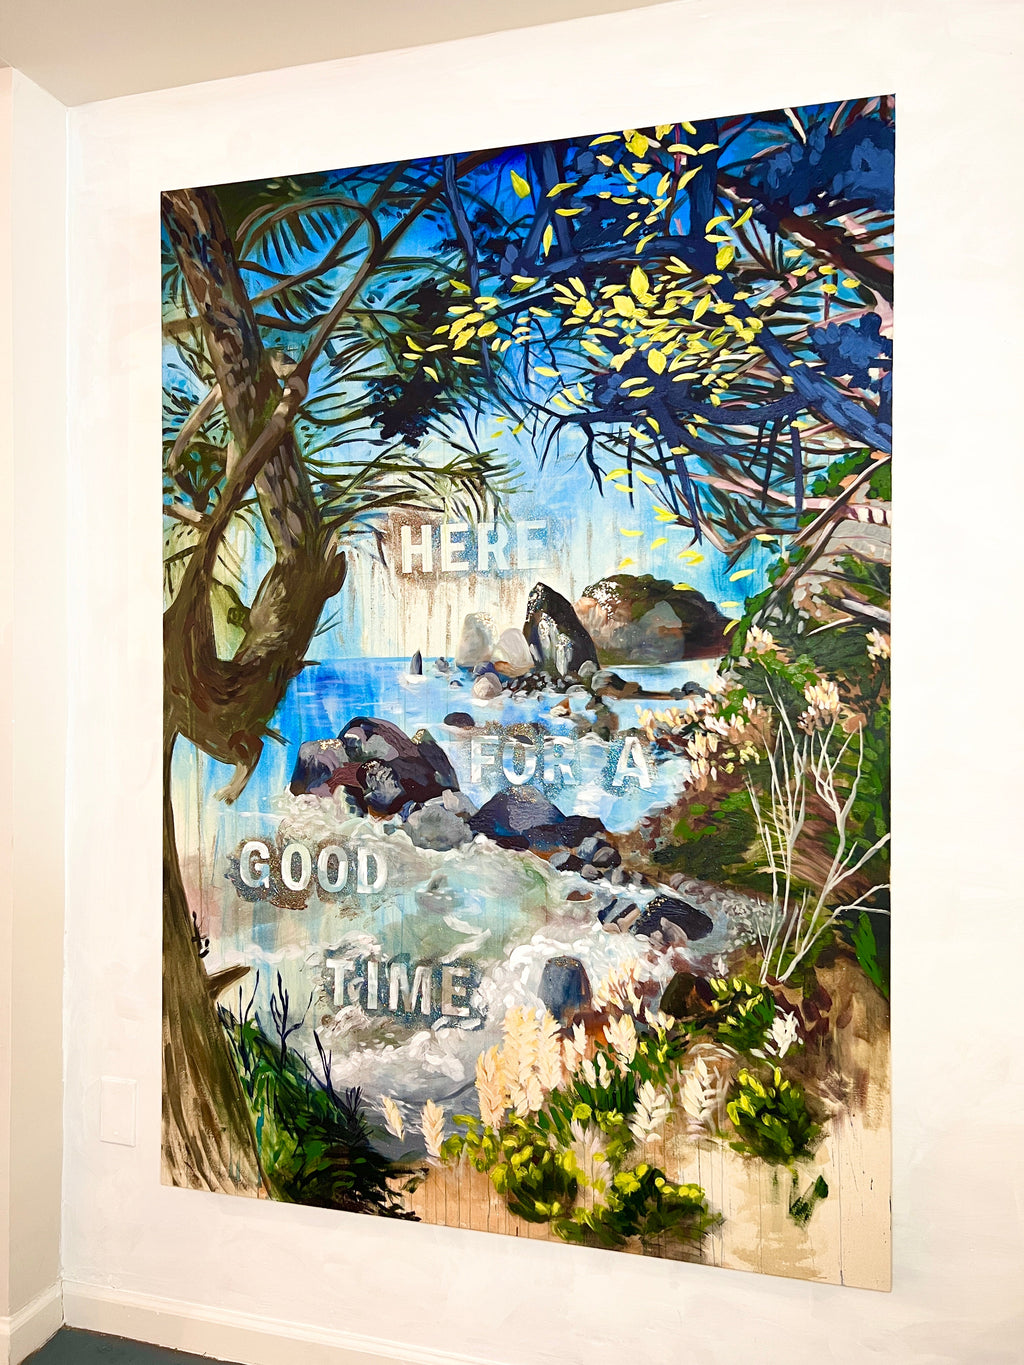 Here for a Good Time - Adele Gilani Art Gallery